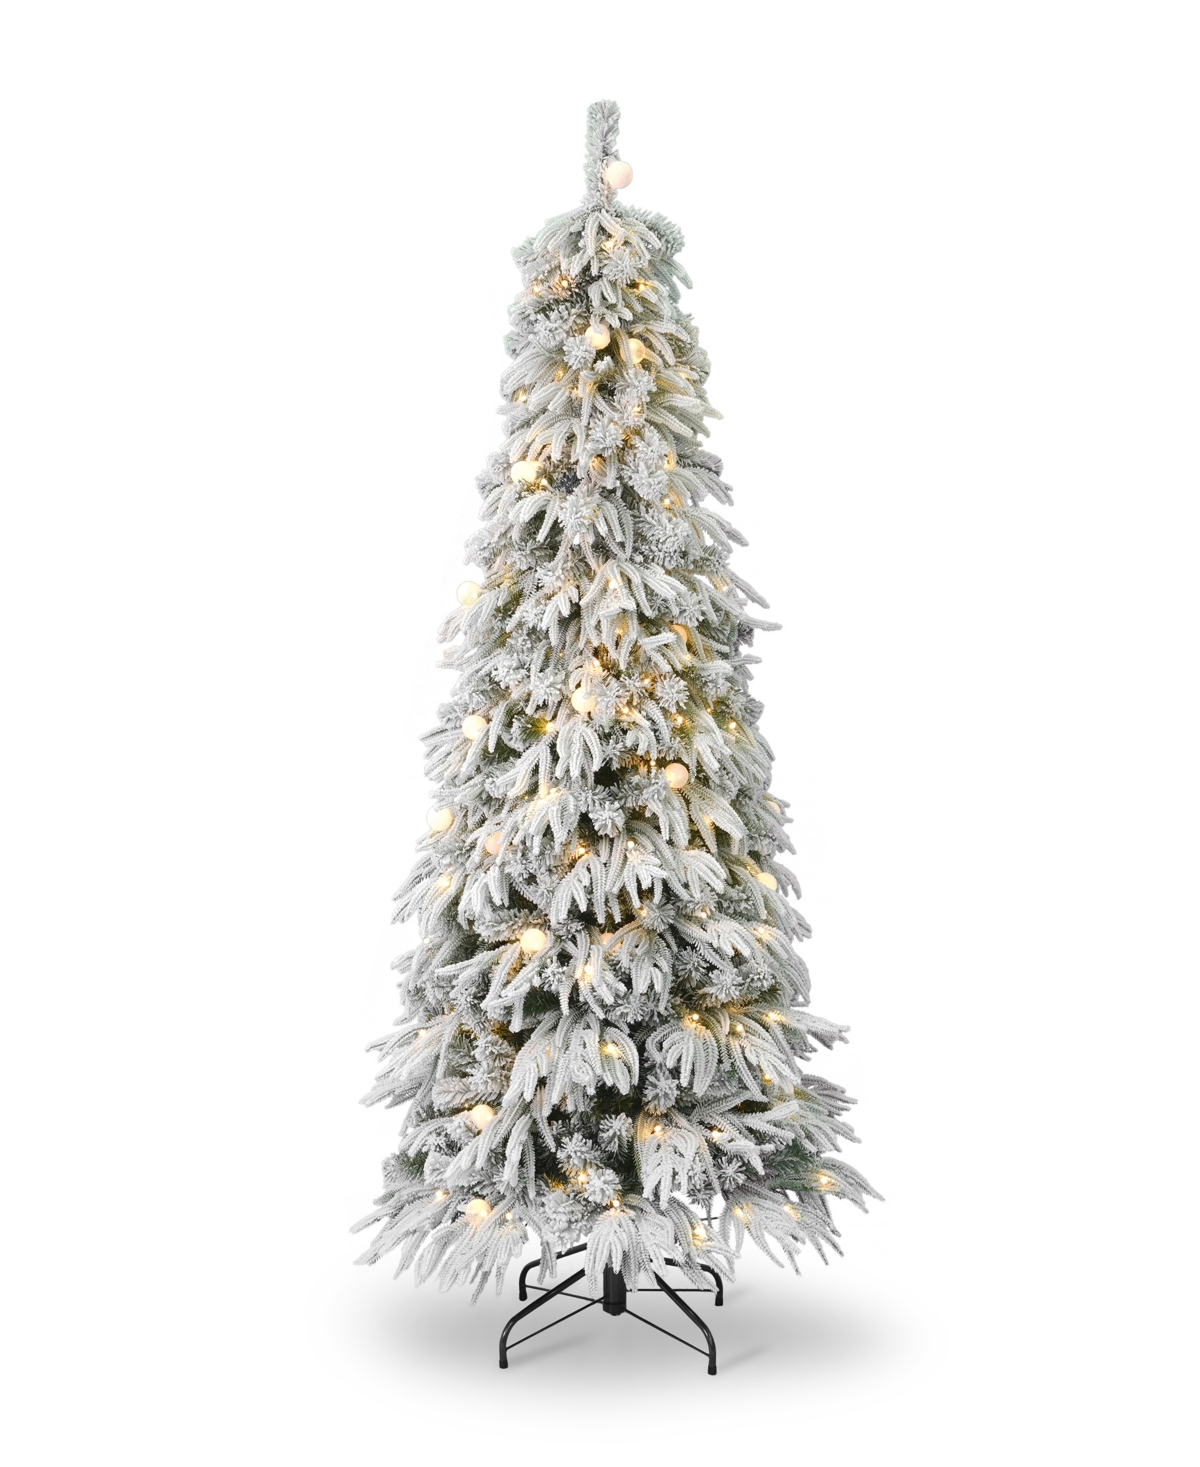 Frosted Acadia 7' Pre-Lit Flocked Pe Mixed Pvc Slim Tree with Metal Stand, 2571 tips, 250 Changing Led Lights - White